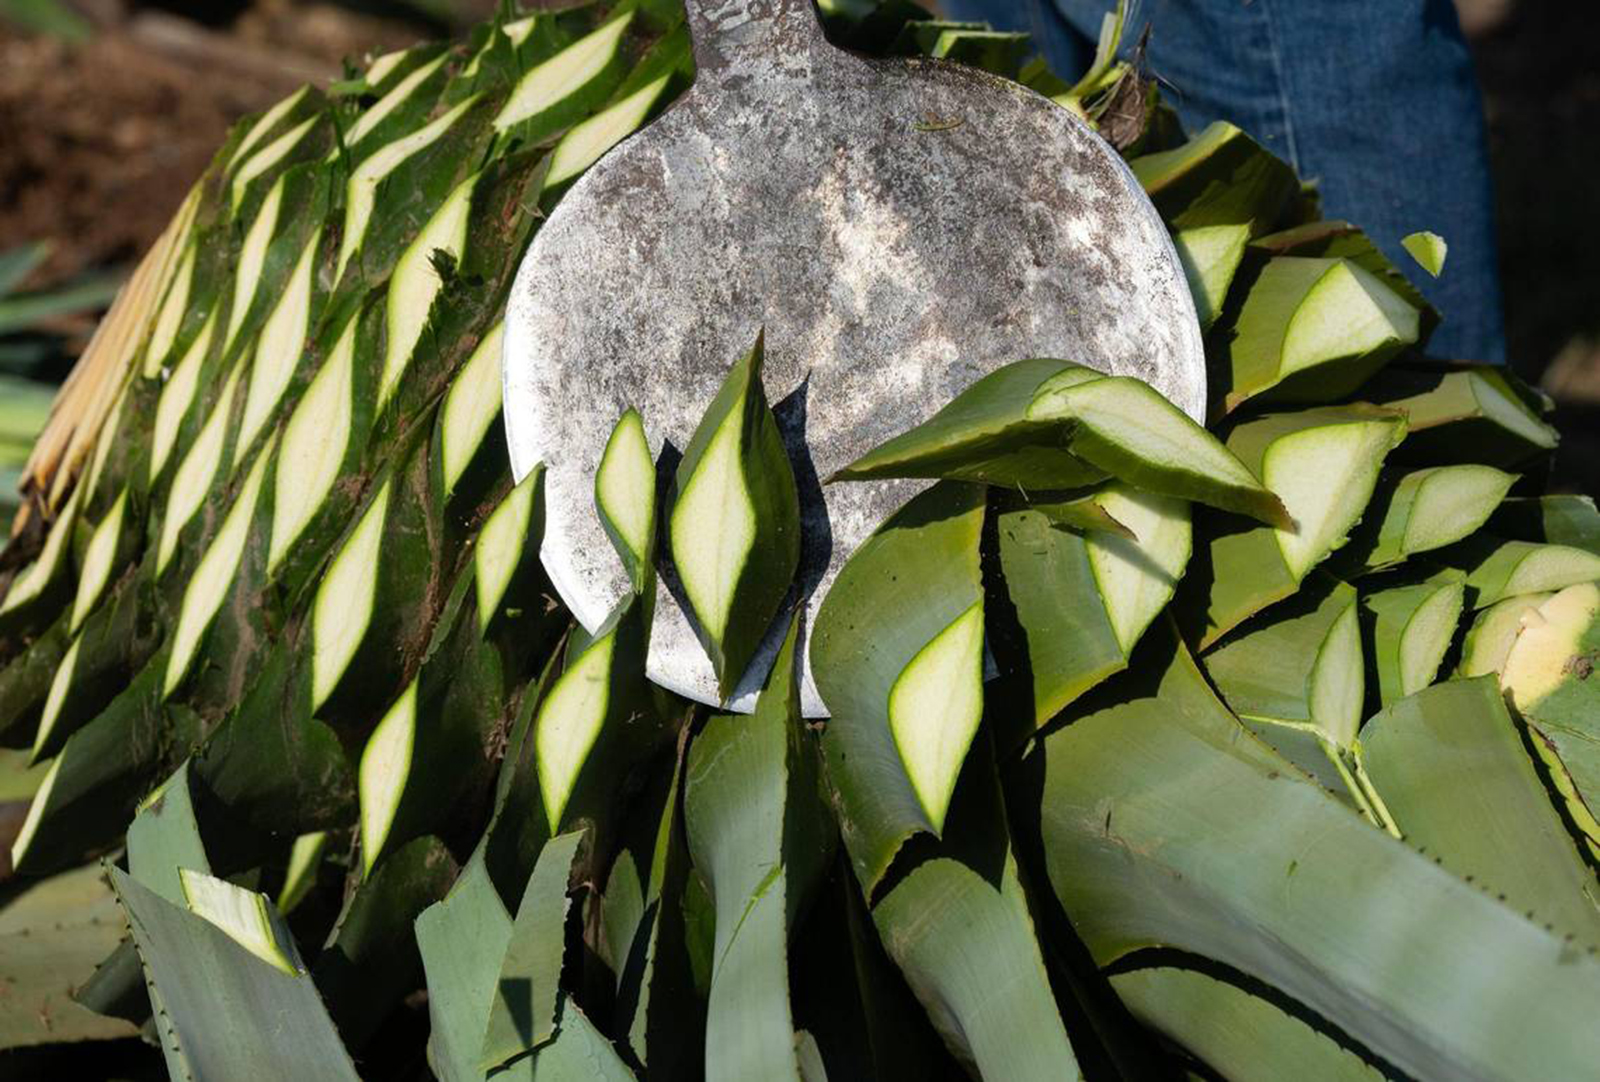 Antonio Chavez uses a coa to slice off the leaves of the agave "piña" bulb